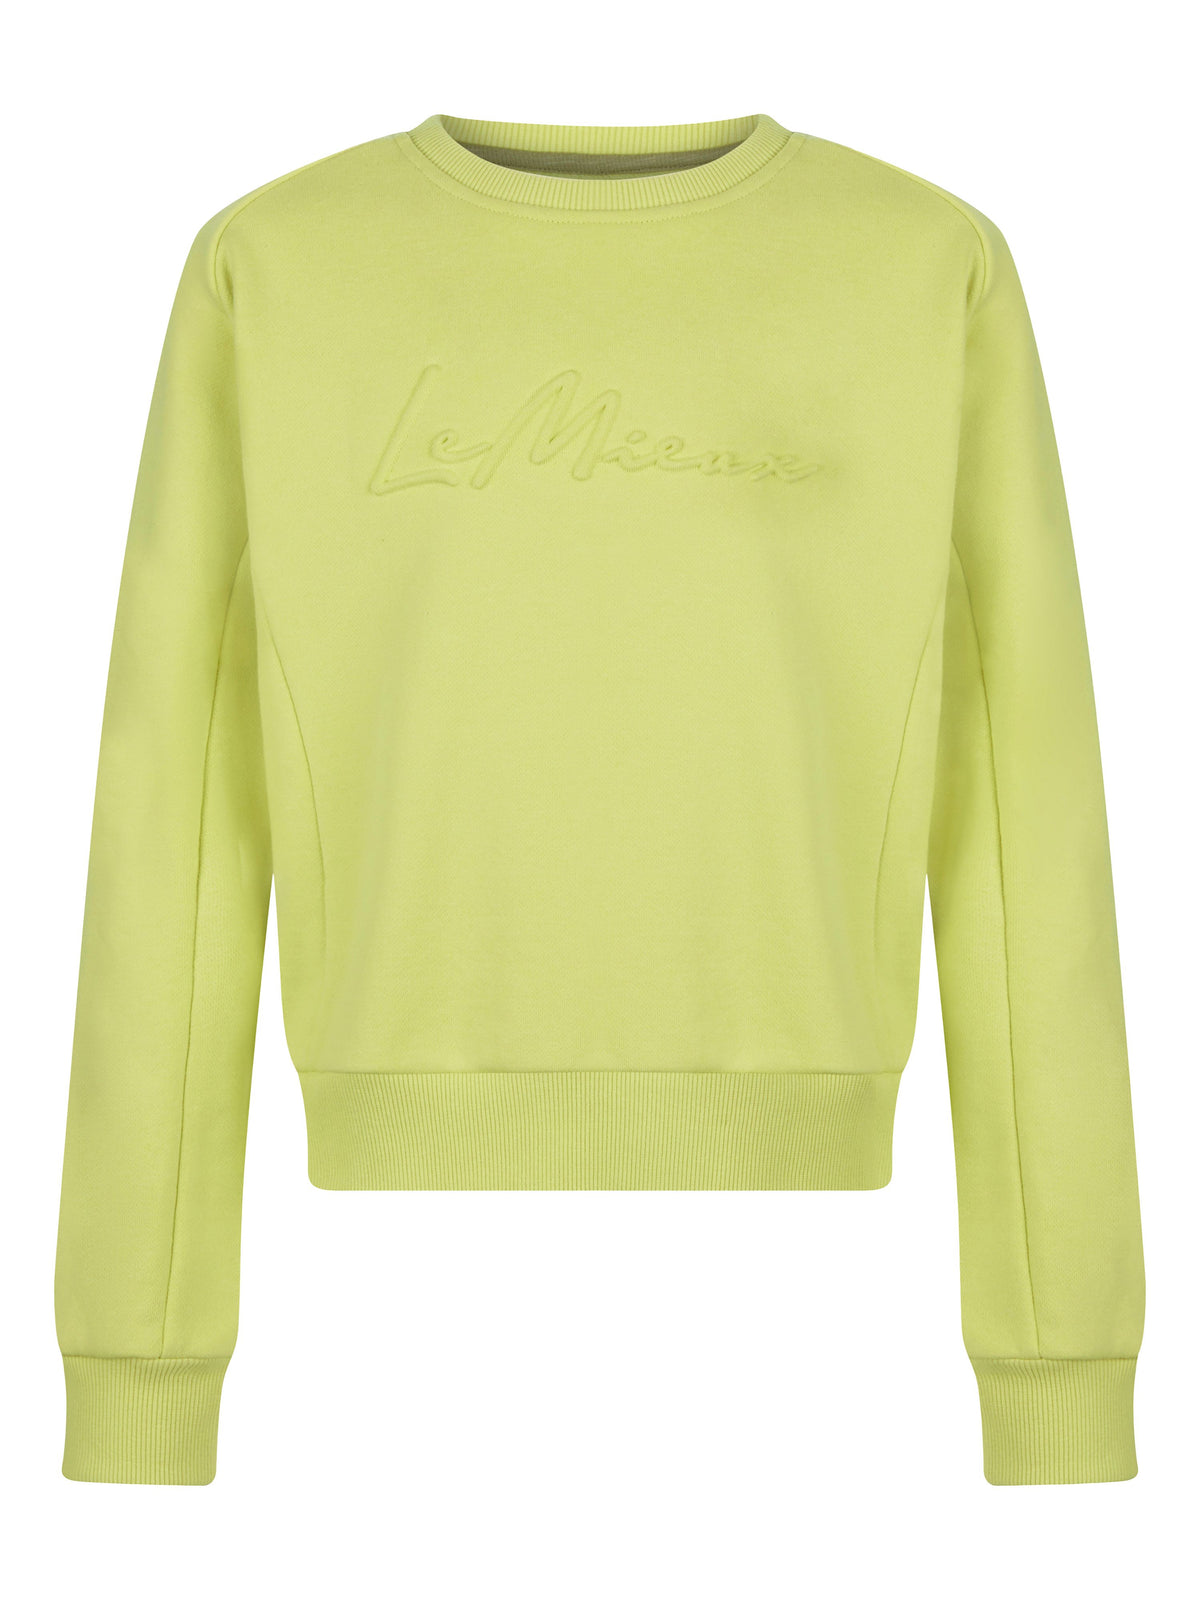 LeMieux Young Riders Cassie Sweat Shirt